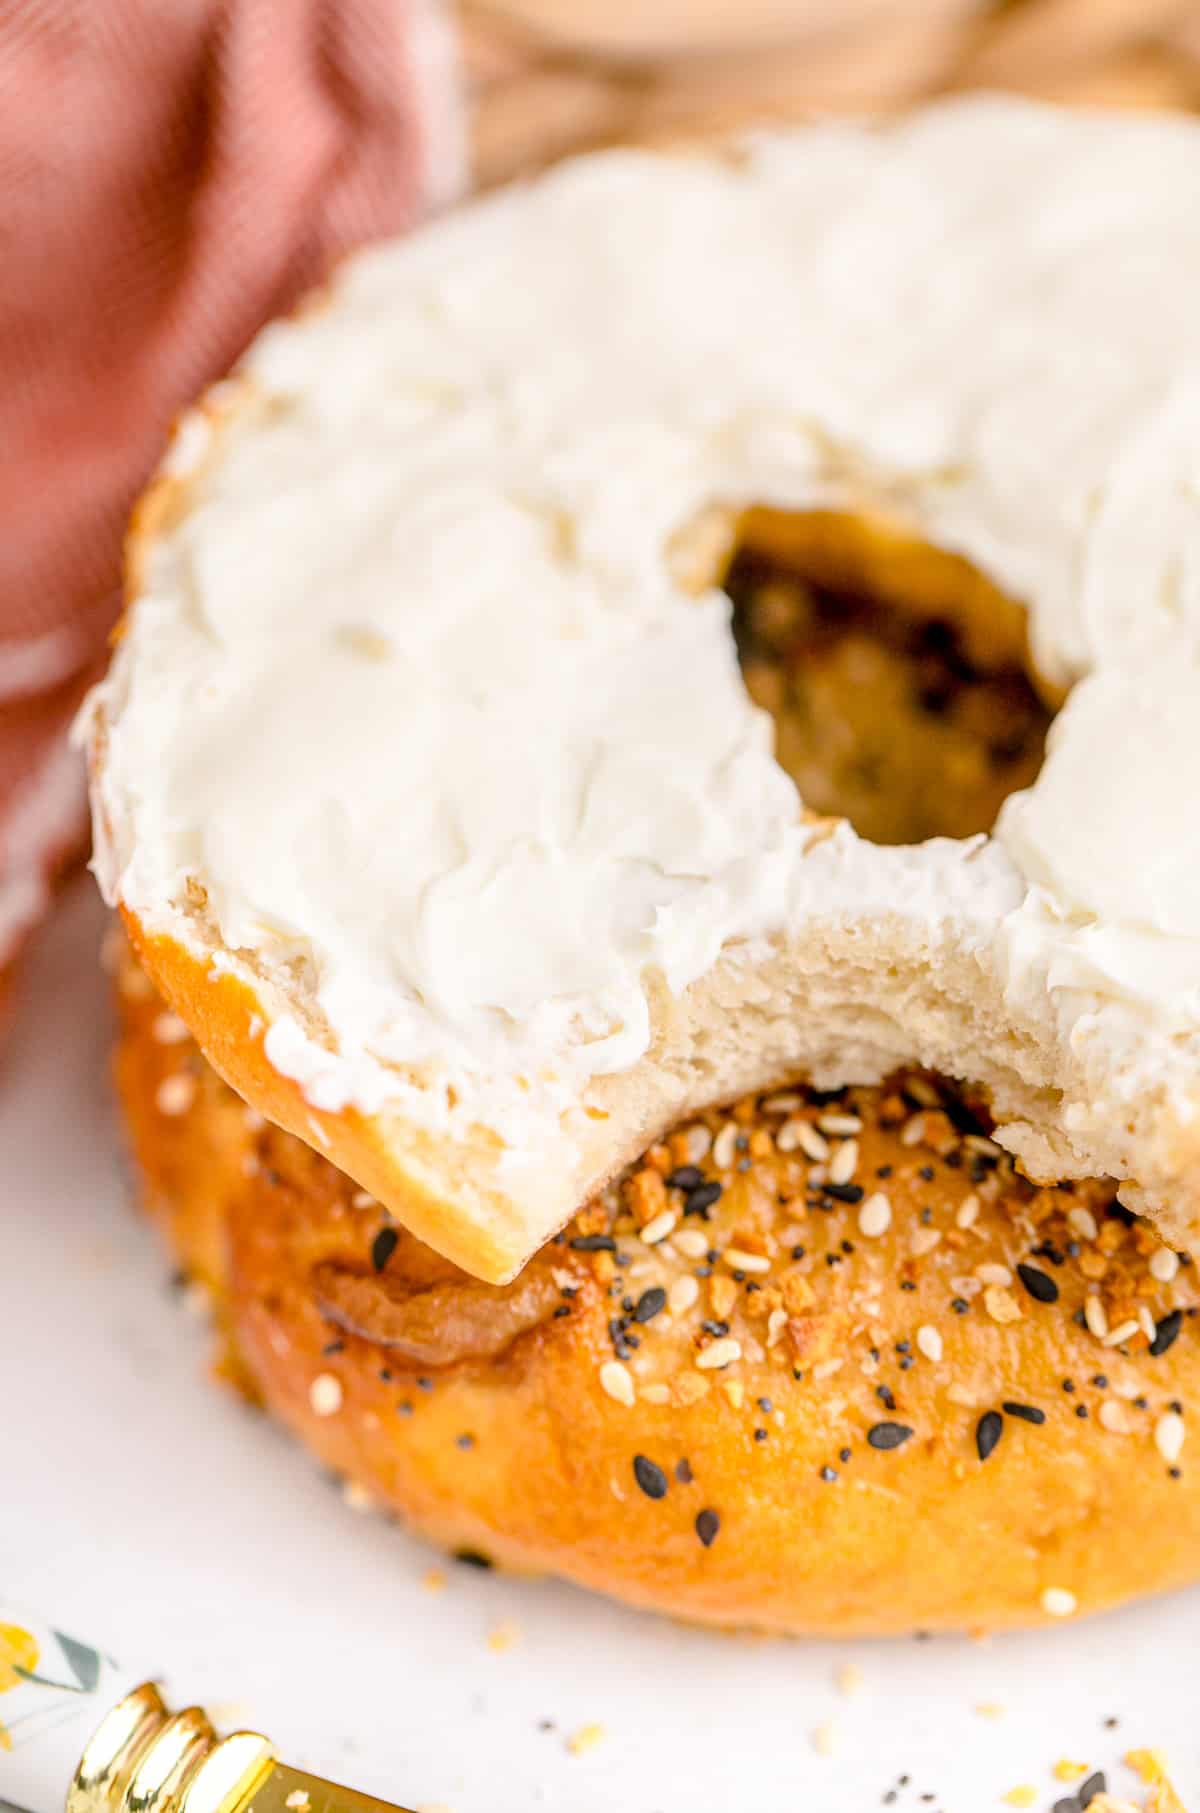 Sliced bagel topped with cream cheese and a bite taken out of it.